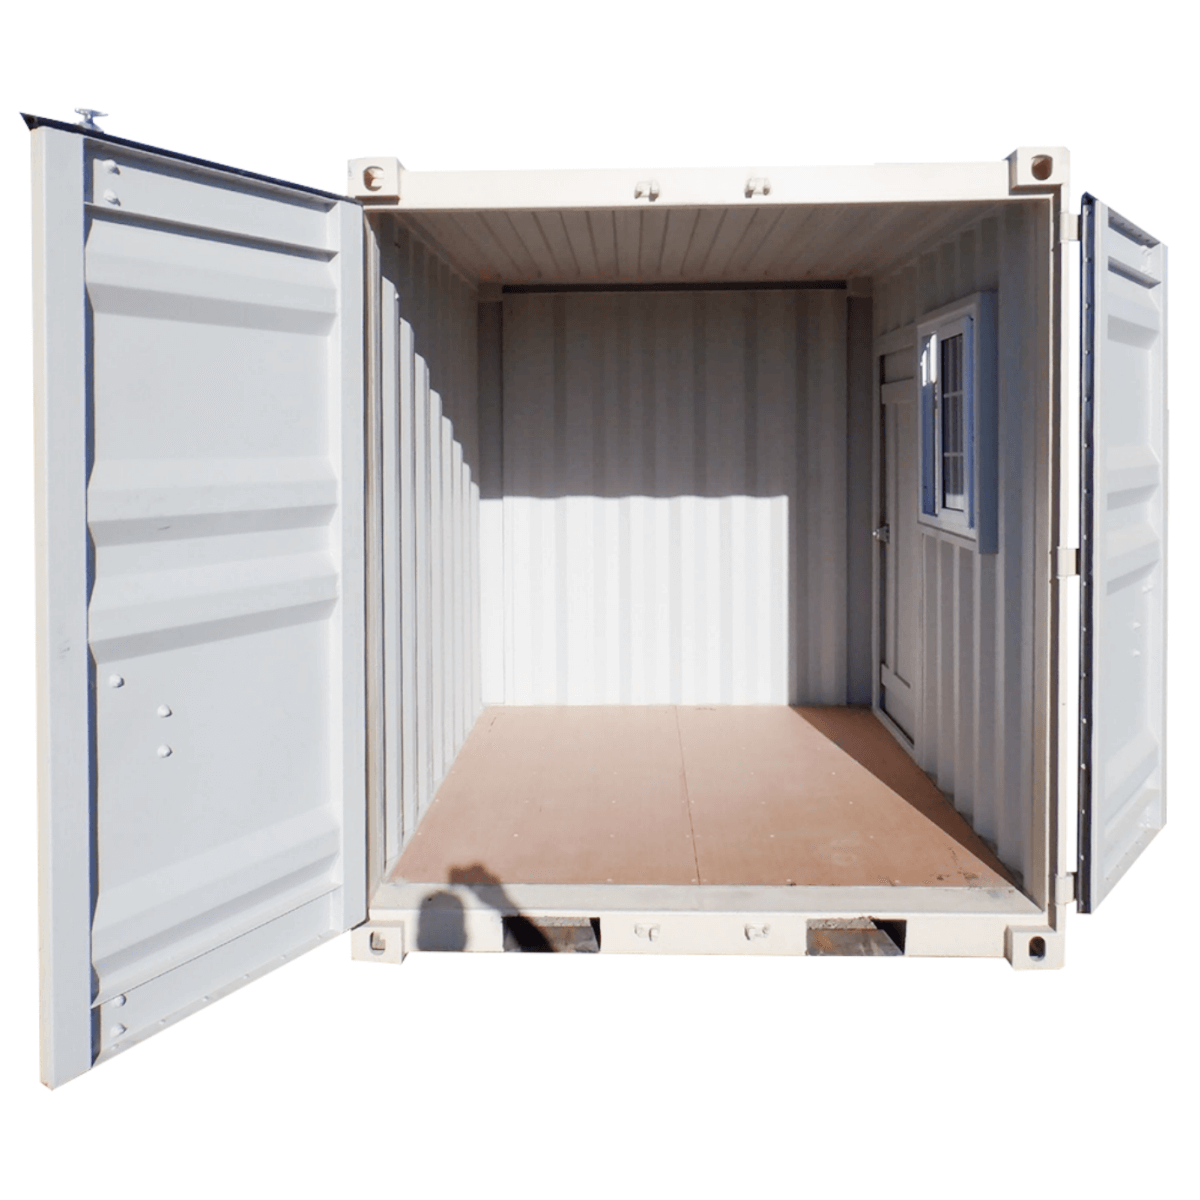 8ft Small Cubic Shipping Container